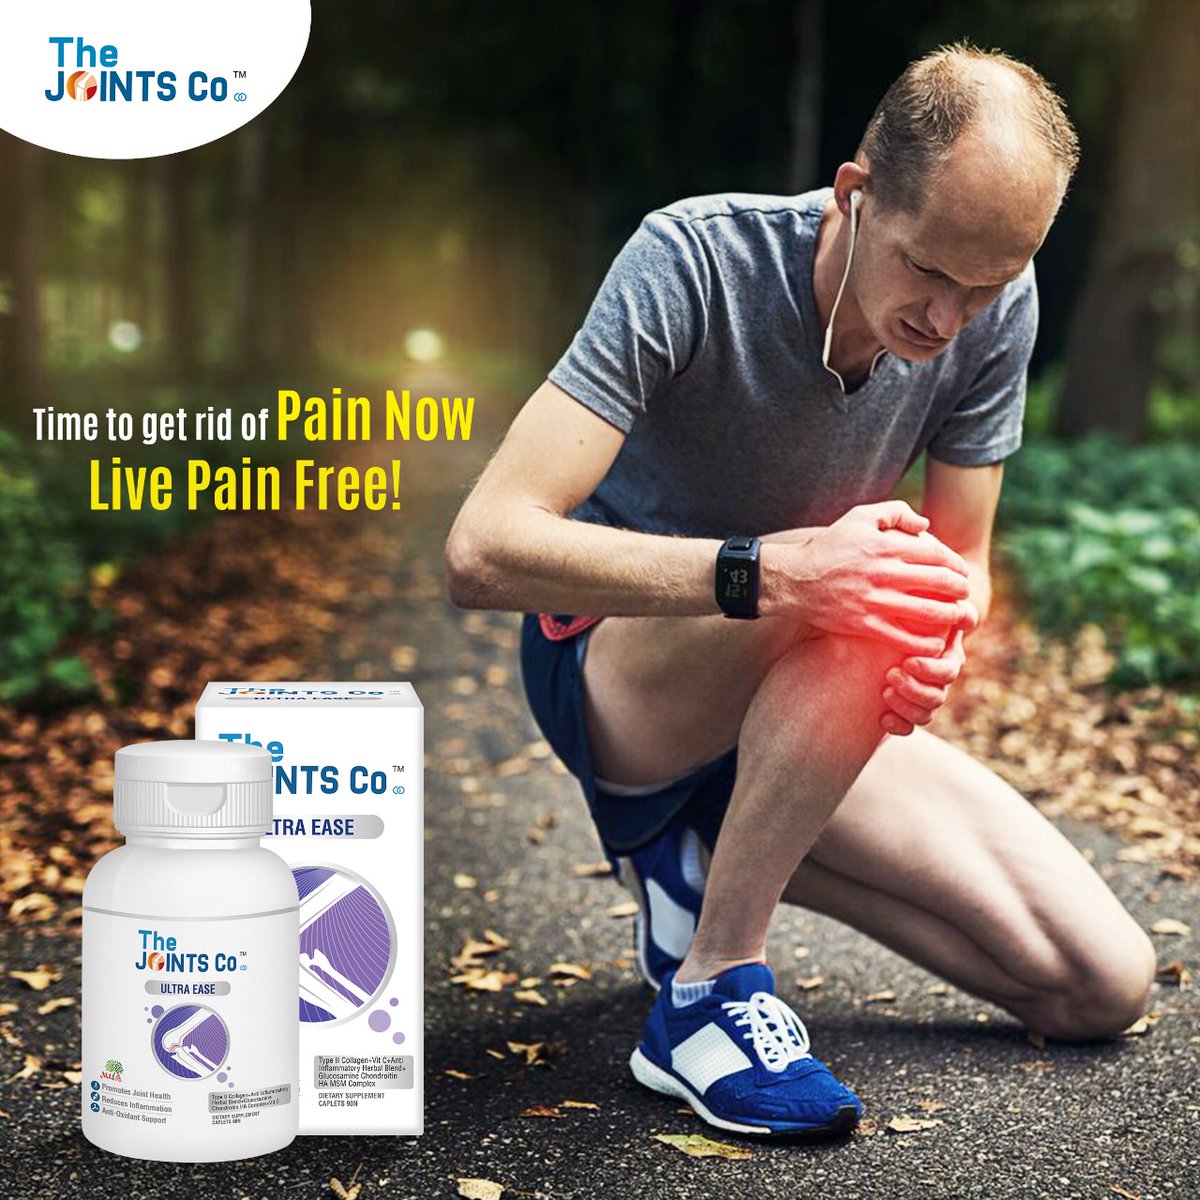 The Joints Co Ultra Ease is developed for all kinds of joint pain and osteoarthritis. 

#thejointsco #joints #painrelief #jointpain #sportsinjuries #jointflexibility #functionaltraining #shopnow #ridofpain #instagram #facebook #productsthatwork  #agedoesntmatter #agefactor